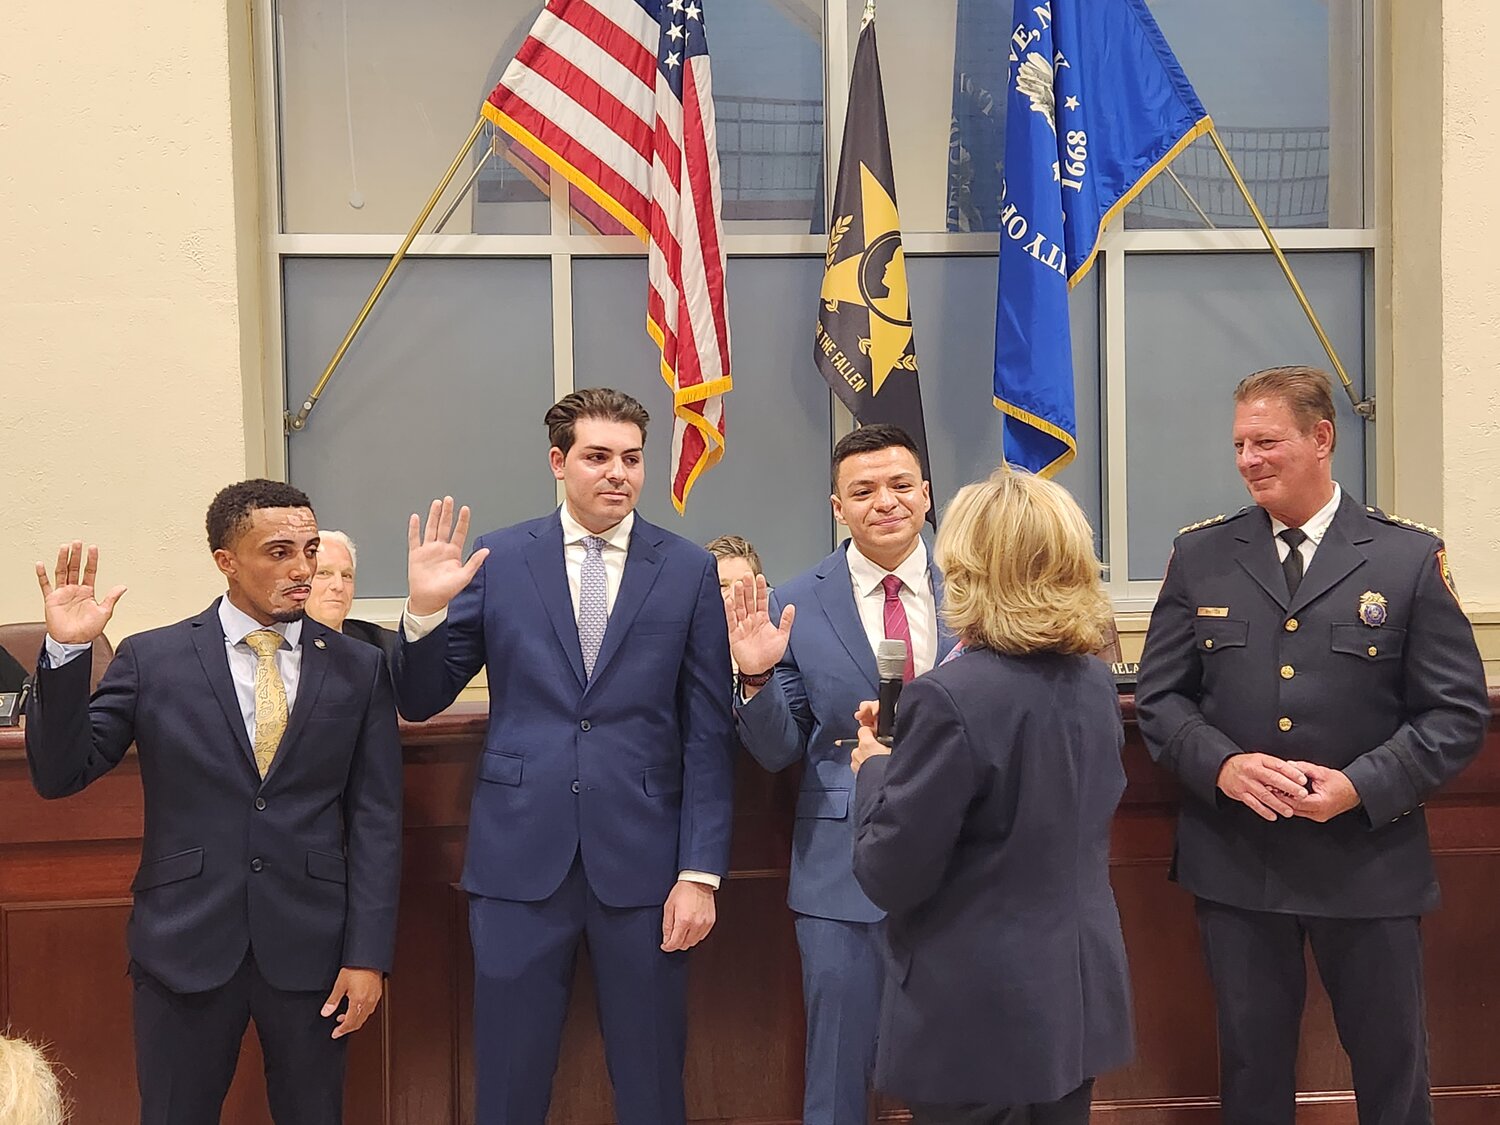 Glen Cove Police Chief William Whitton, far right, looked on as Mayor Pamela Panzenbeck swore in officers Jahrae O’Neill, far left, Erasmo Troia and Andres Sicam at City Hall.